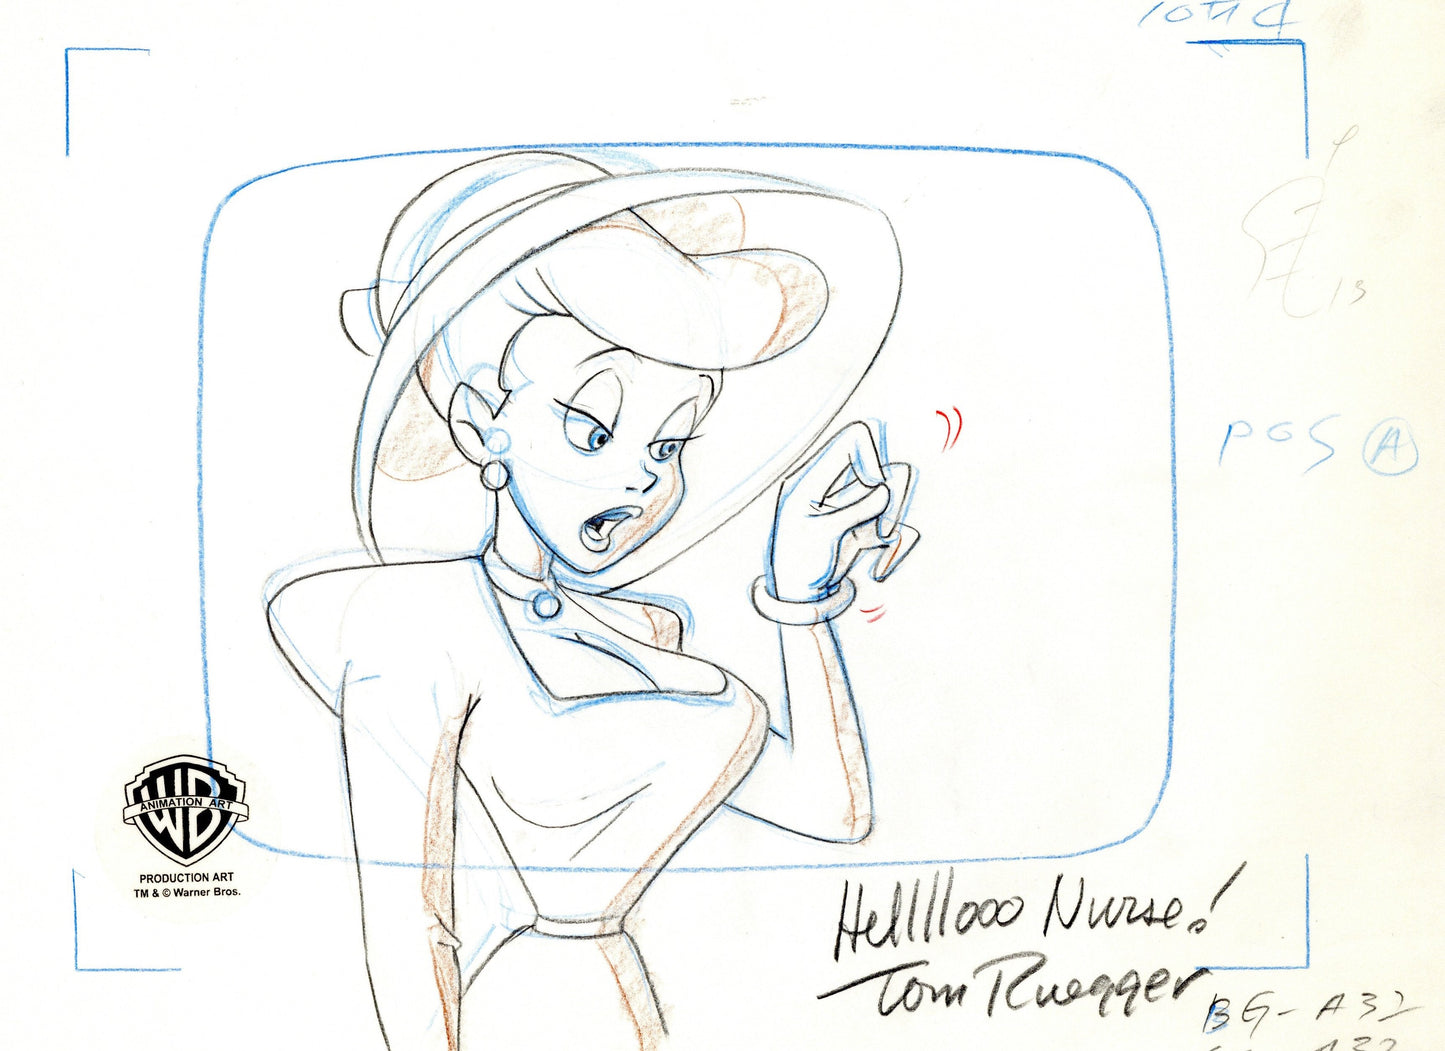 Animaniacs Original Production Layout Drawing Signed by Tom Ruegger: Hello Nurse